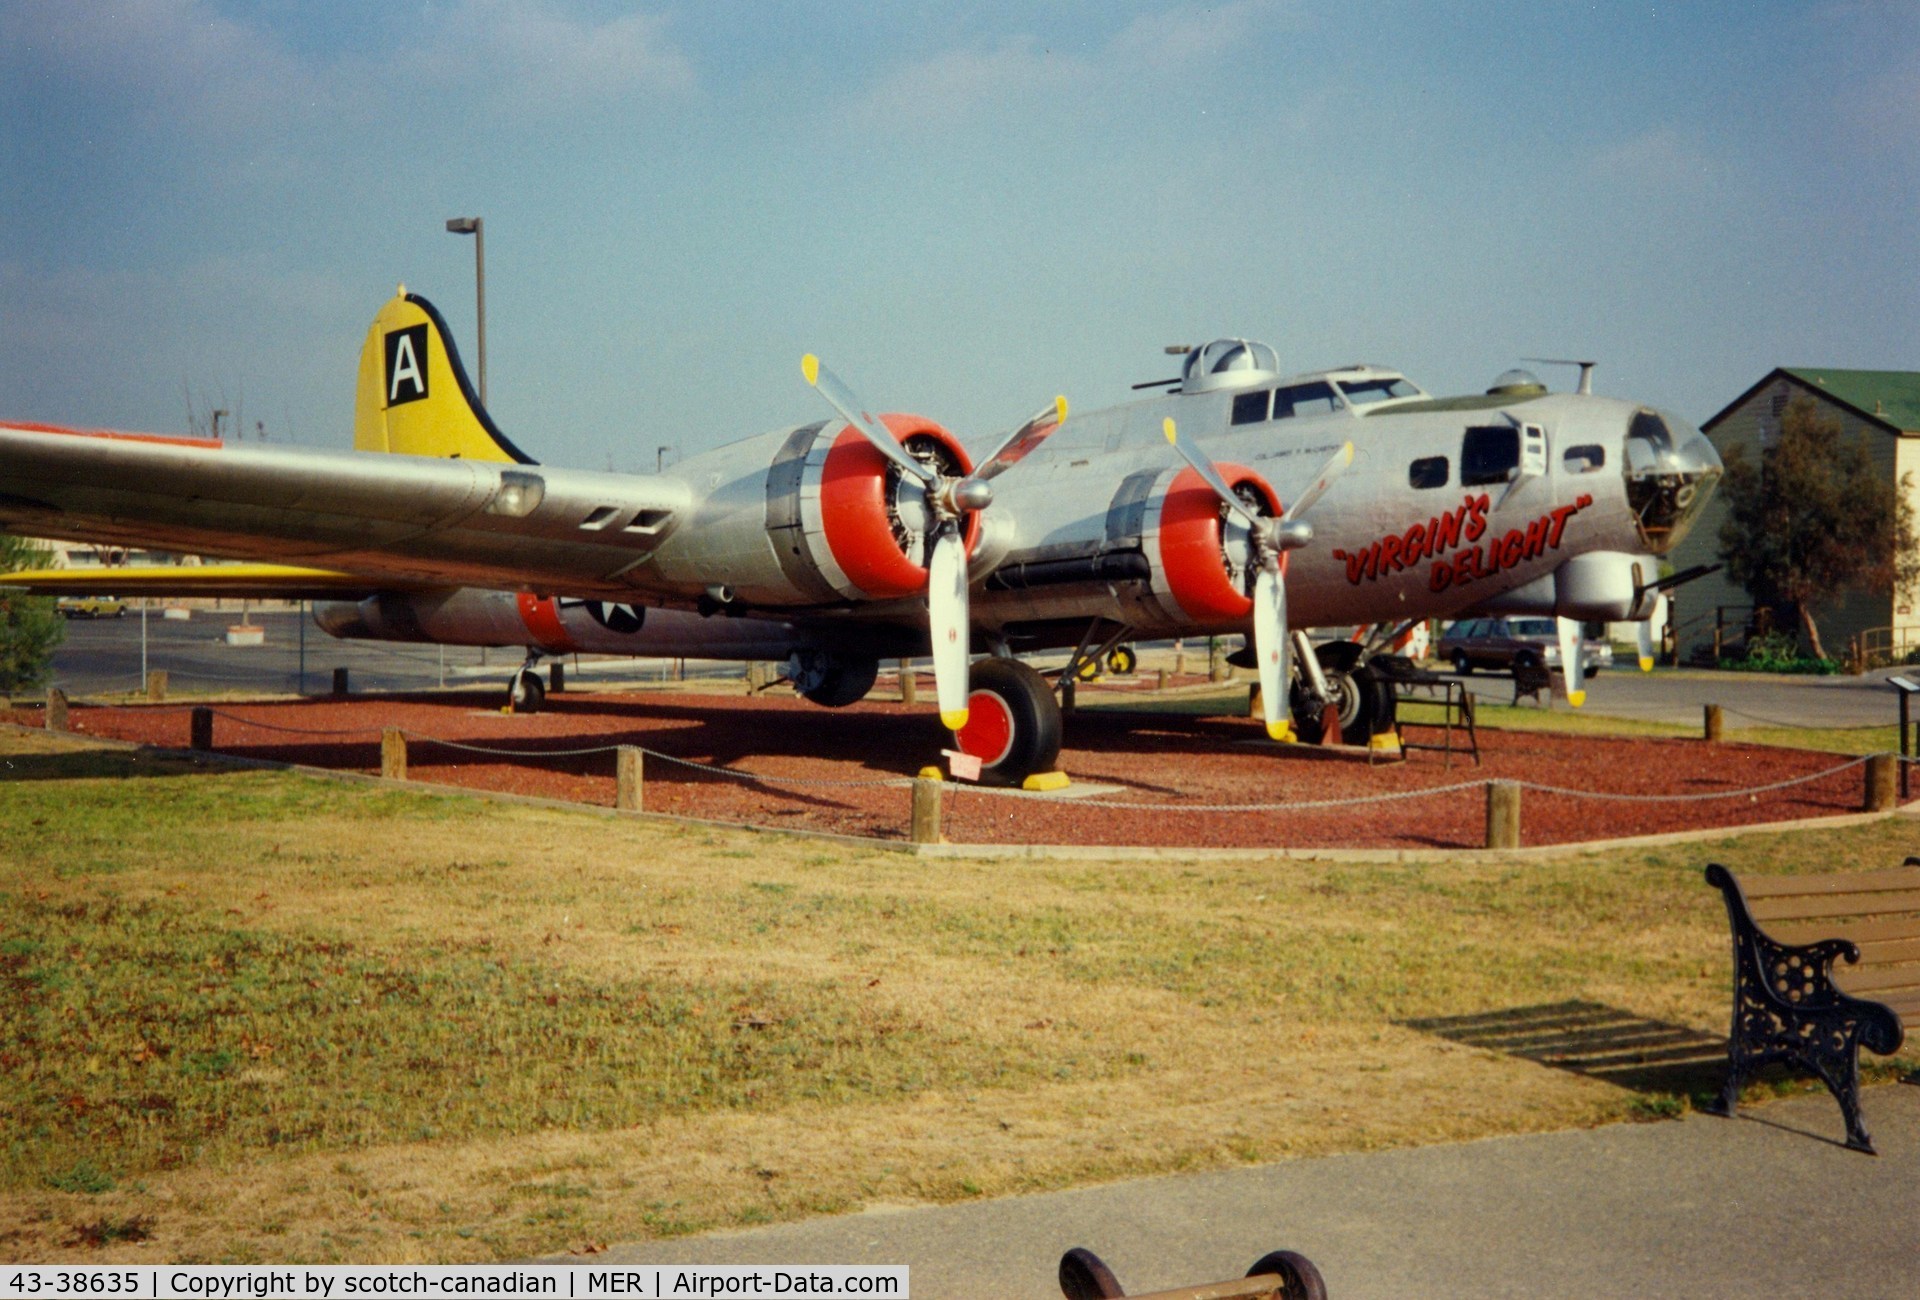 43-38635, 1943 Boeing B-17G Flying Fortress C/N 9613, 1943 Boeing B-17G Flying Fortress at Castle Air Museum, Atwater, CA - July 1989